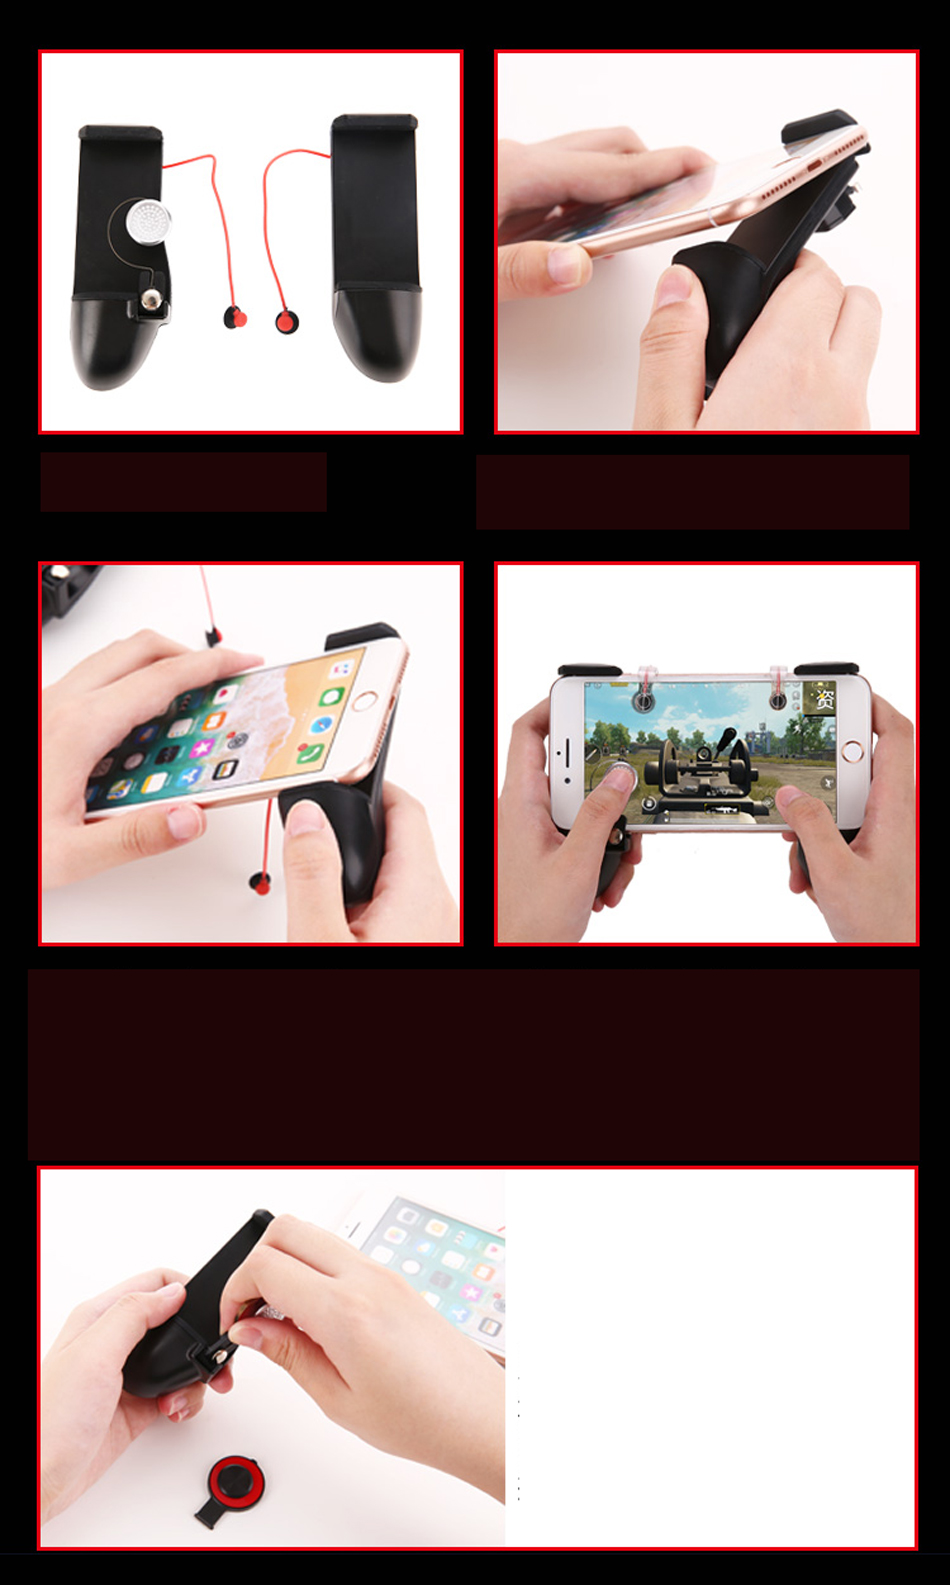 3-In-1-Multi-function-Mobile-Gamepad-Game-Controller-Joystick-for-PUBG-Mobile-Game-Trigger-Fire-Butt-1378392